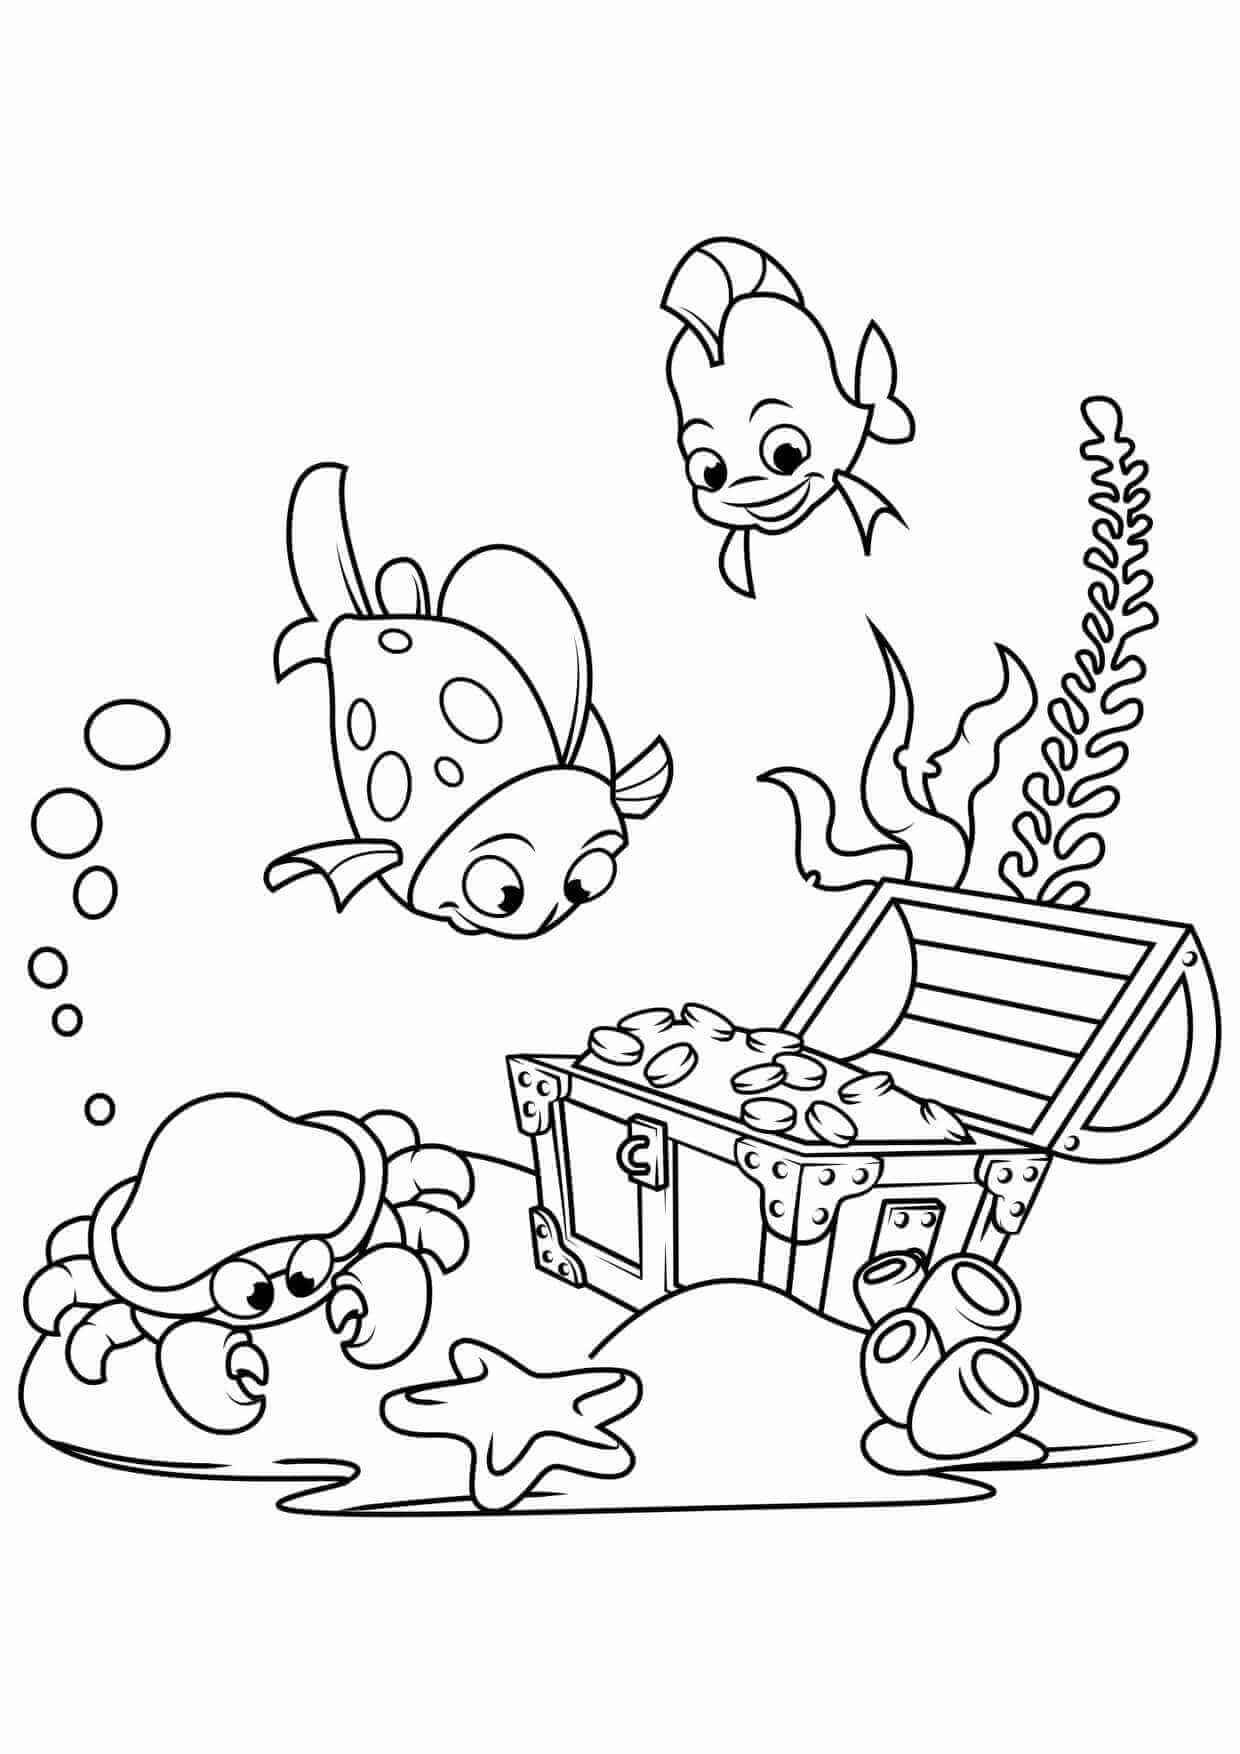 Fun Coloring Pages For Girls
 Free Printable Coloring Pages For Girls